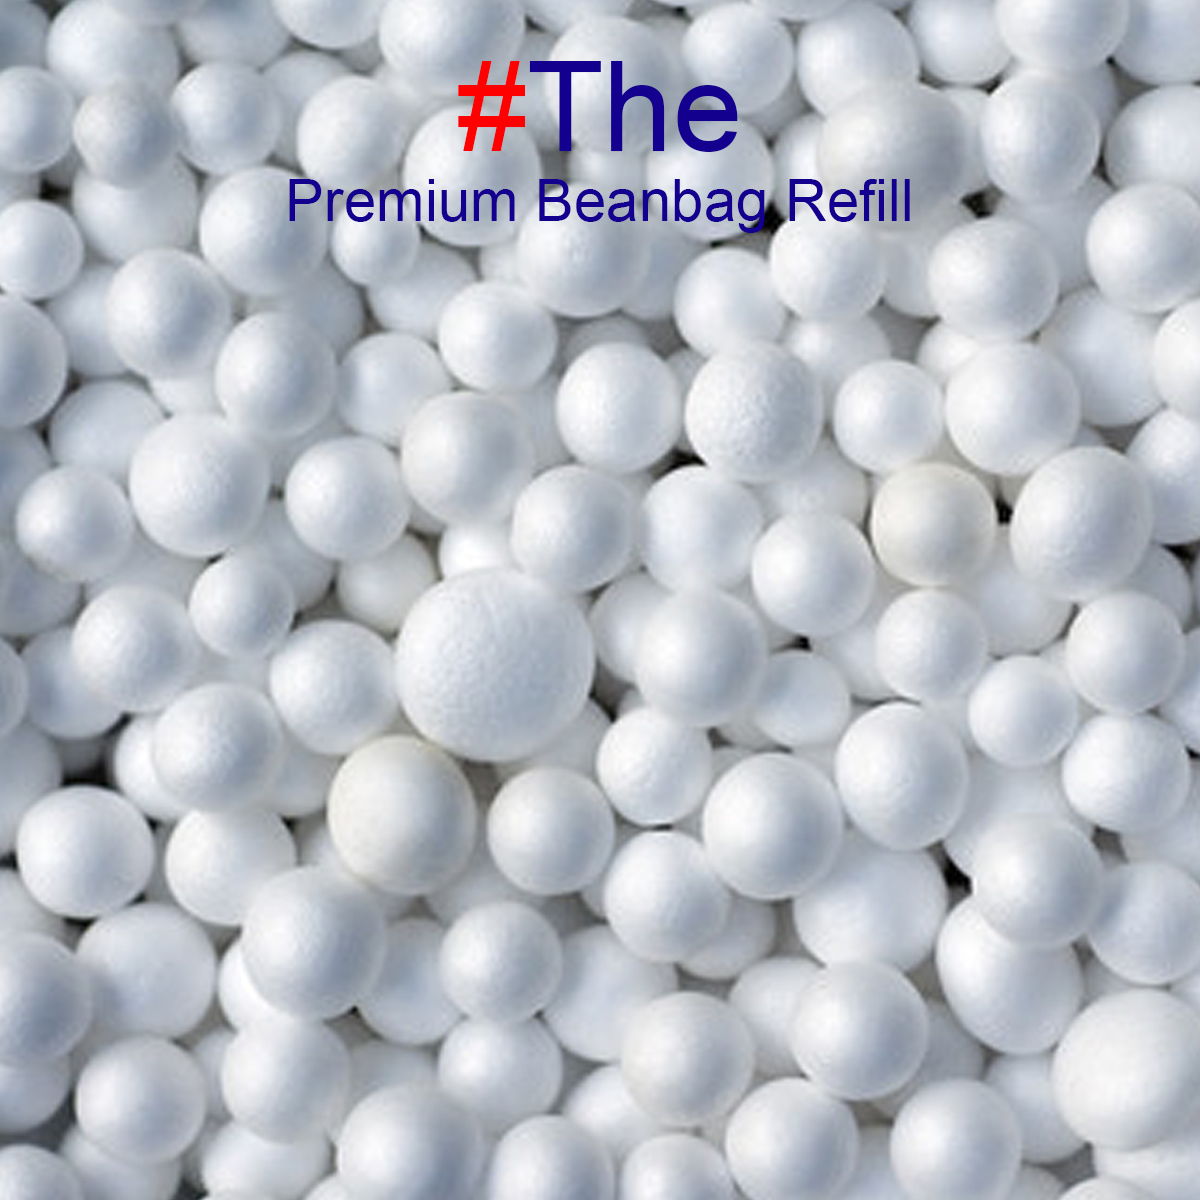 Bulky]1kg Premium Bean Bag Refill 80L Filler for Beanbag, Fast Delivery, Beanbag EPP Beads; EPS Fillers, Bean Bag Couch Chairs Sofa Lazy Lounger  EPS Beads Filling Indoor